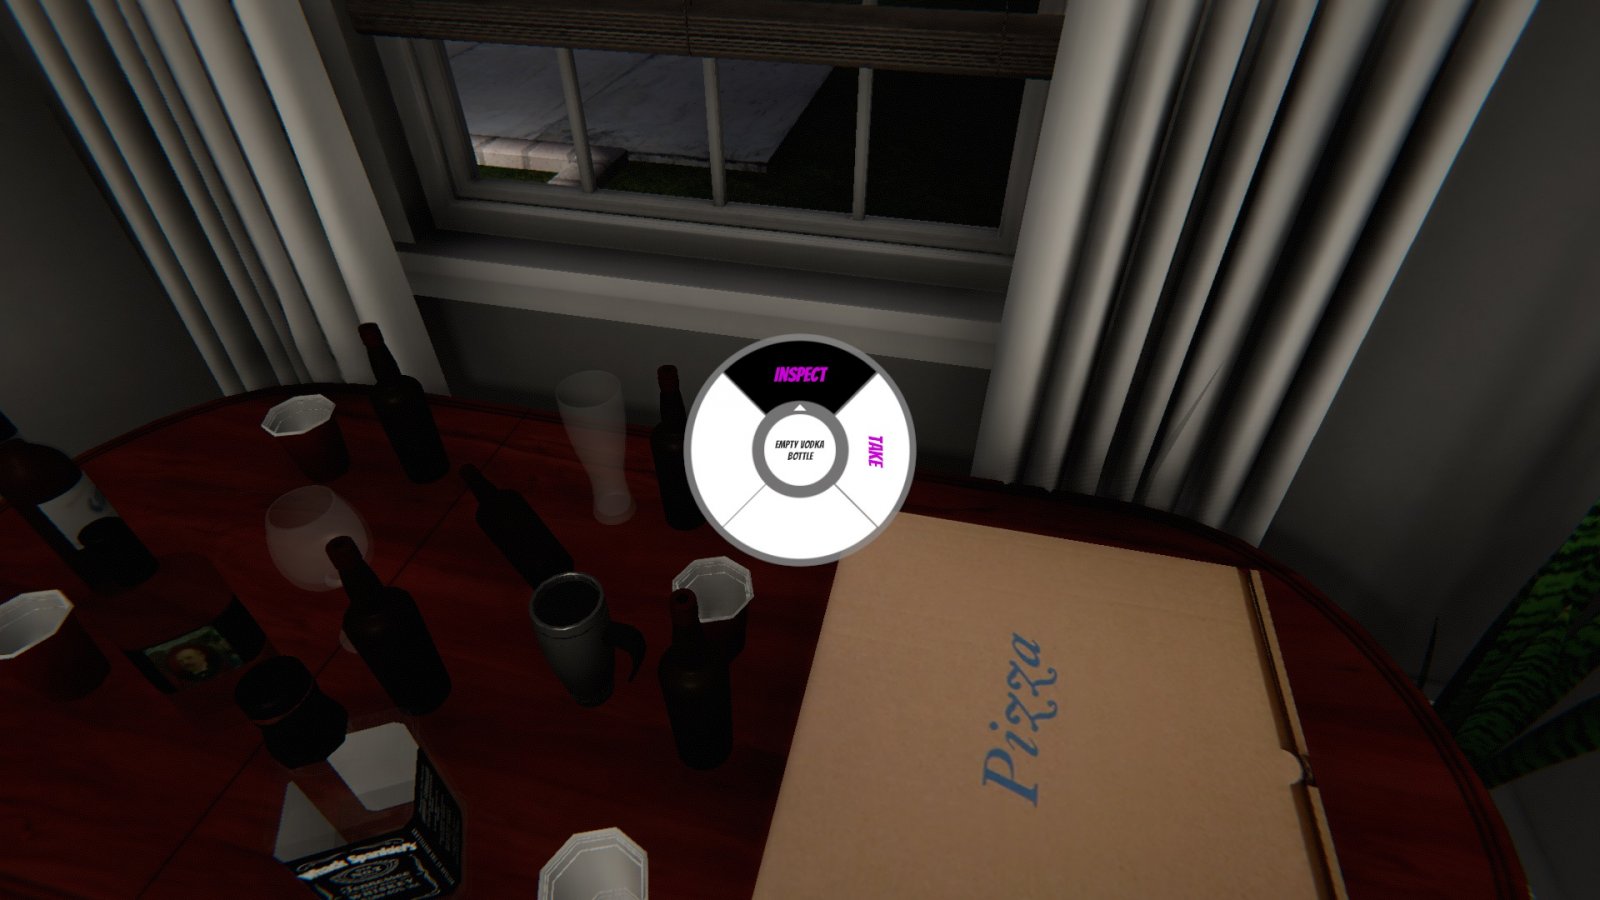 house party hypnohouse mod download